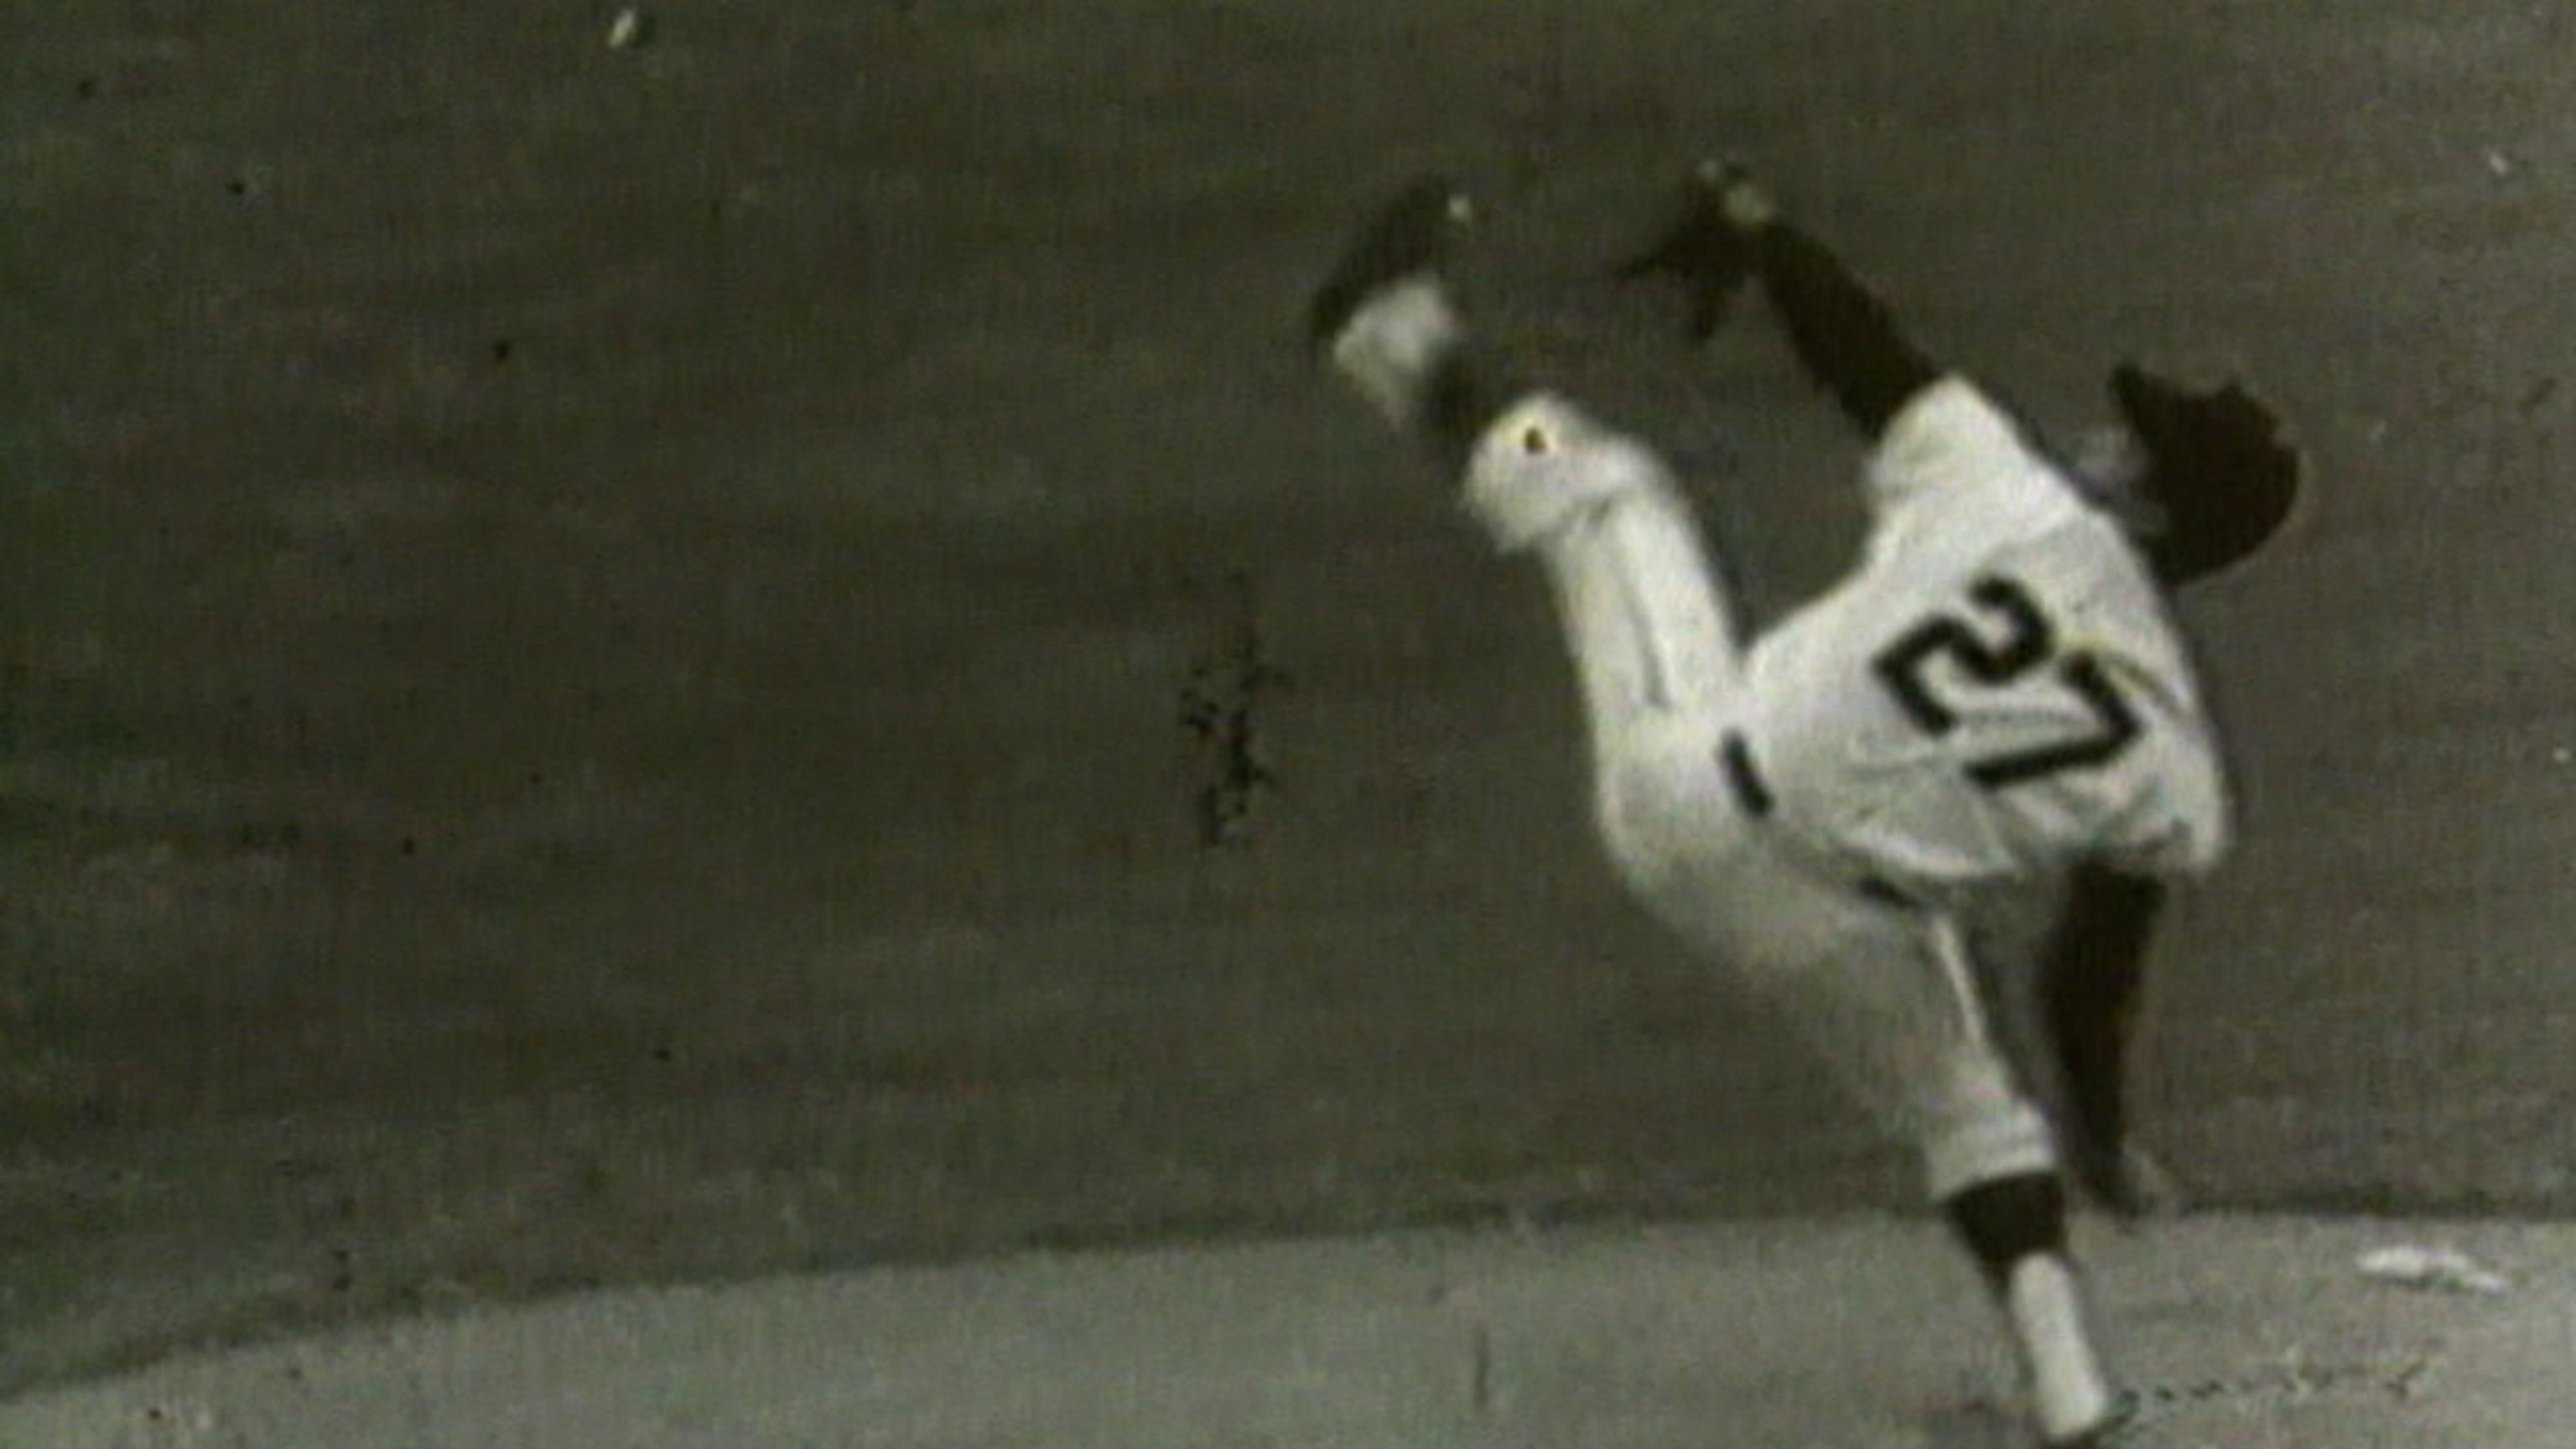 Marichal dominated with Giants